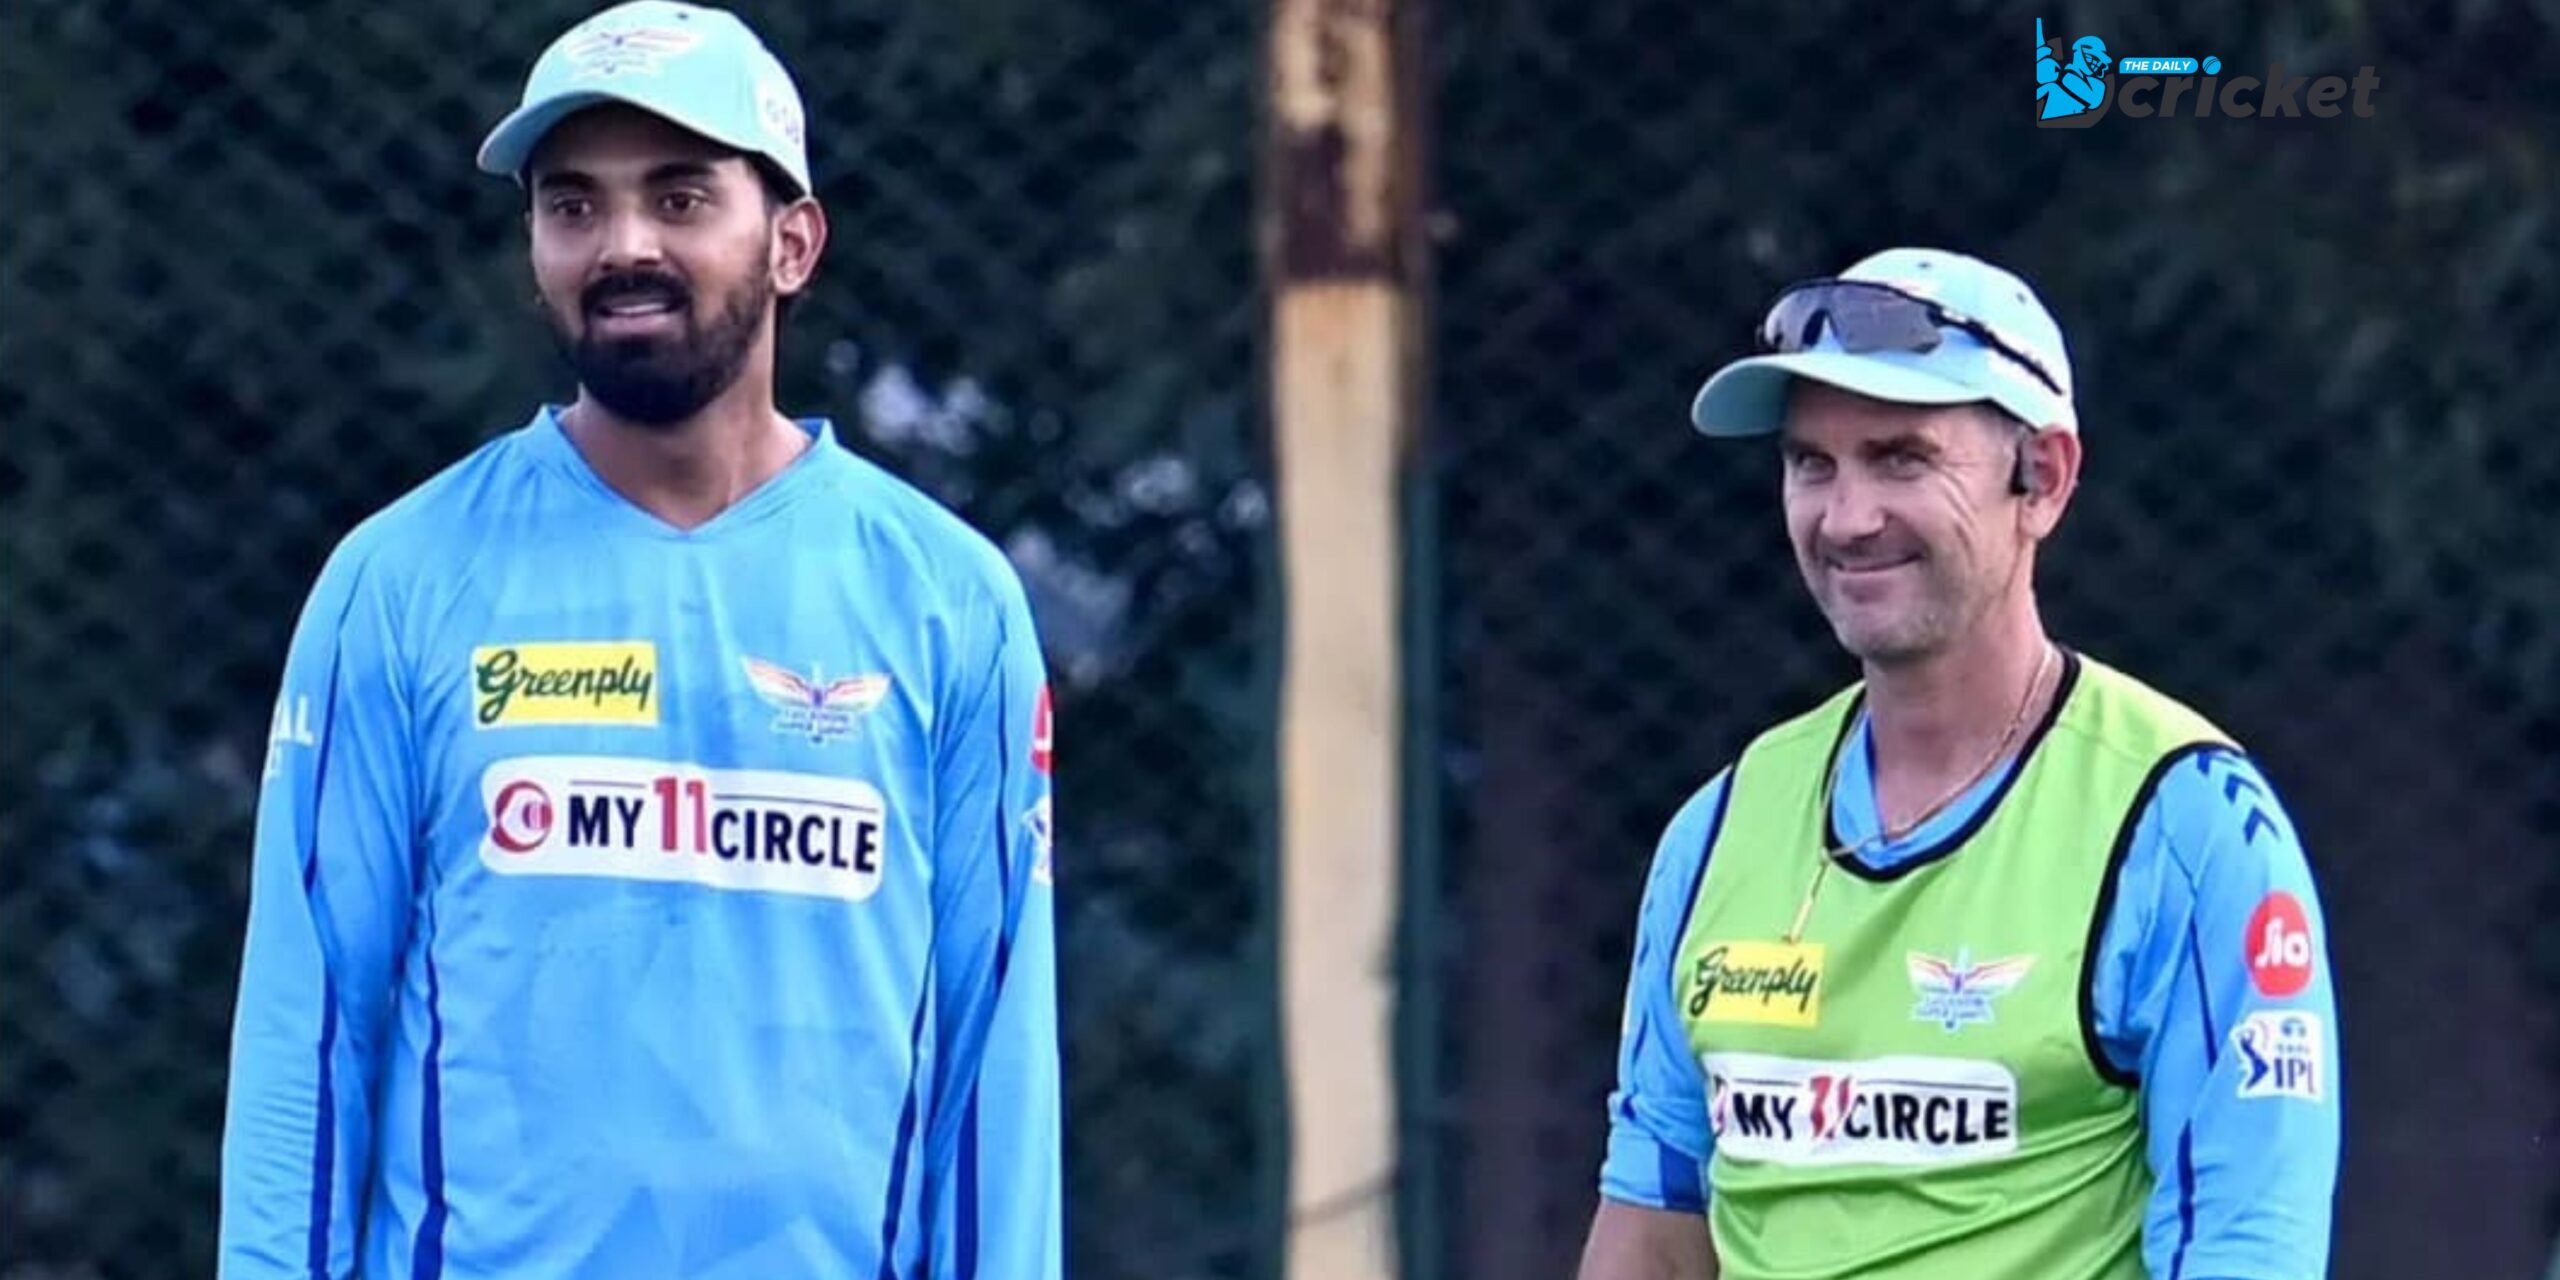 Justin Langer declines India coach position after KL Rahul's 'politics and pressure in team' advise.